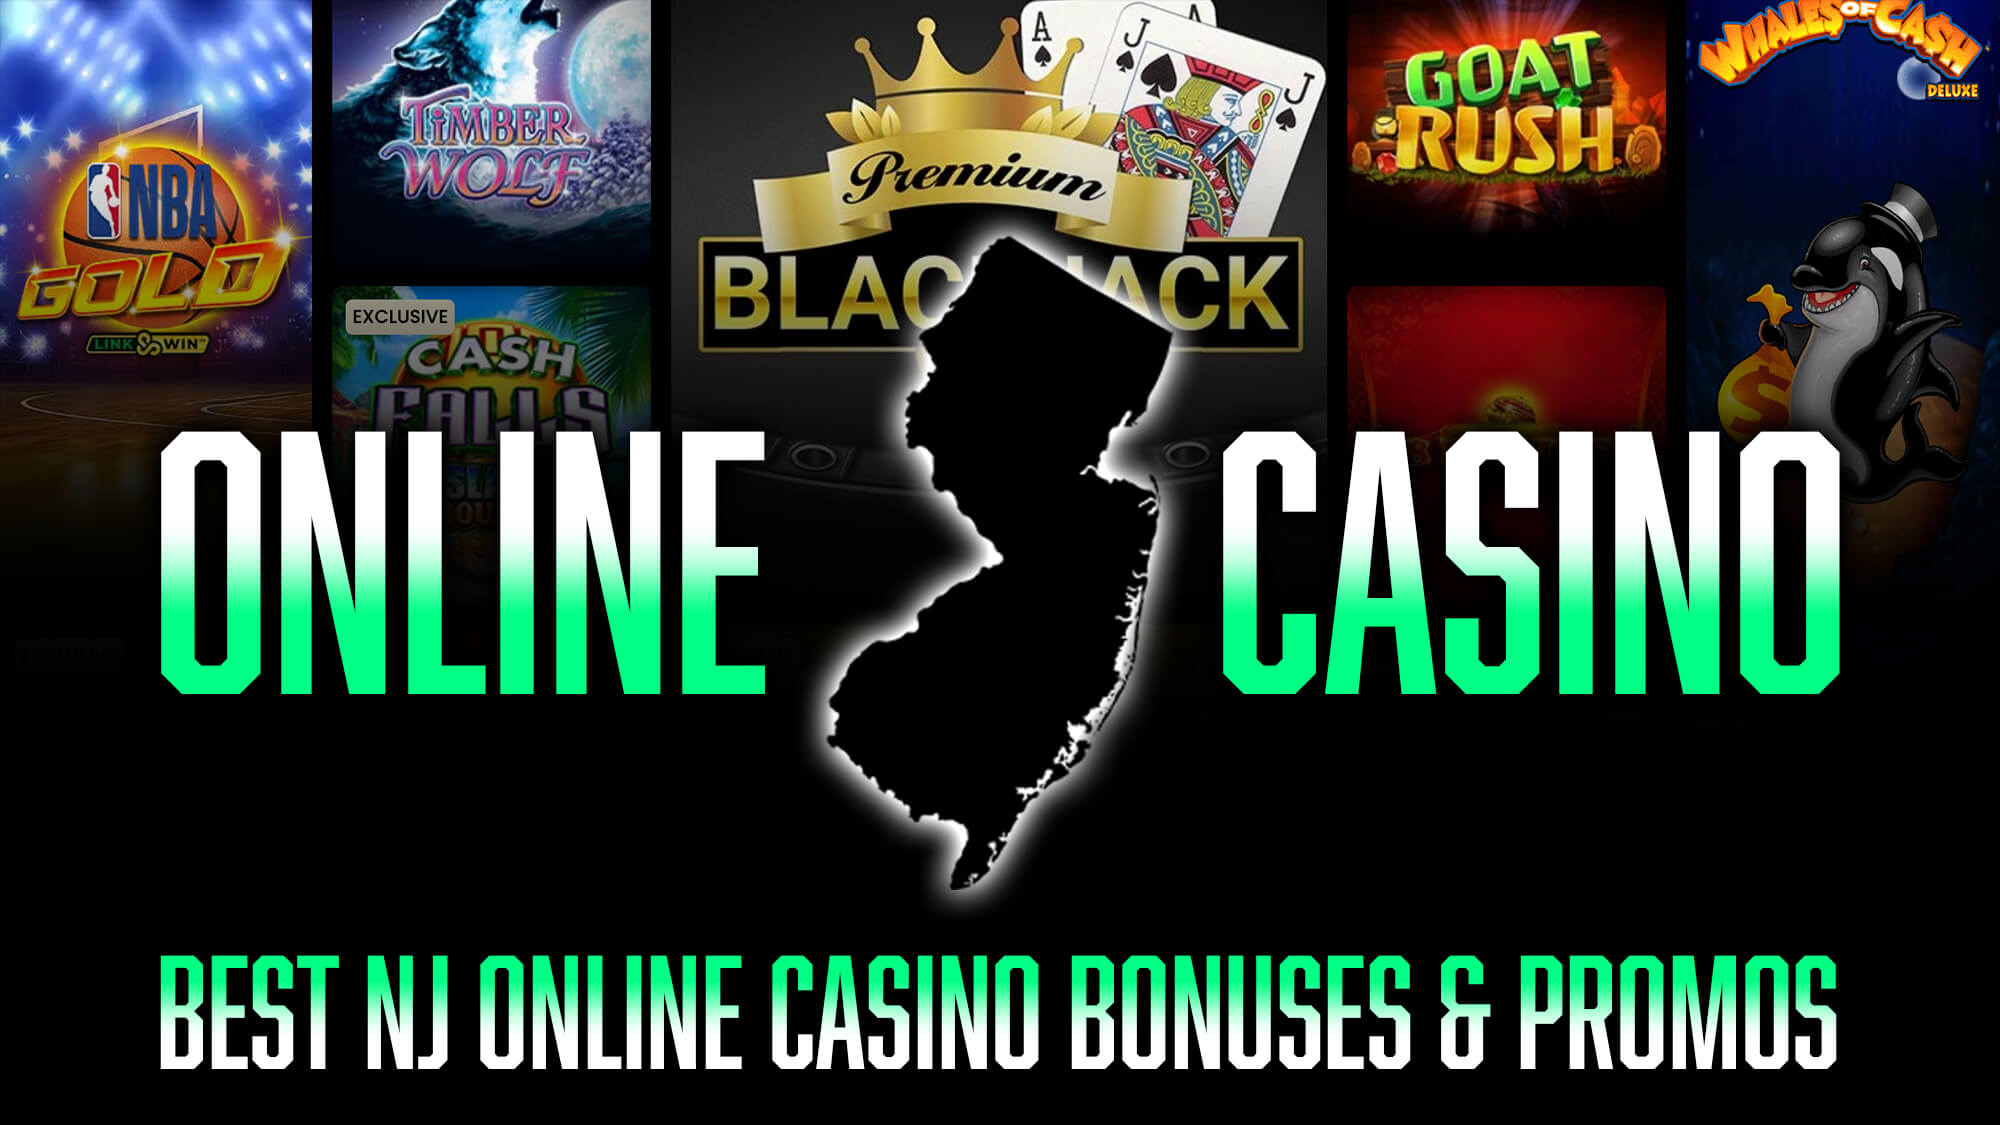 3 More Cool Tools For top online casinos